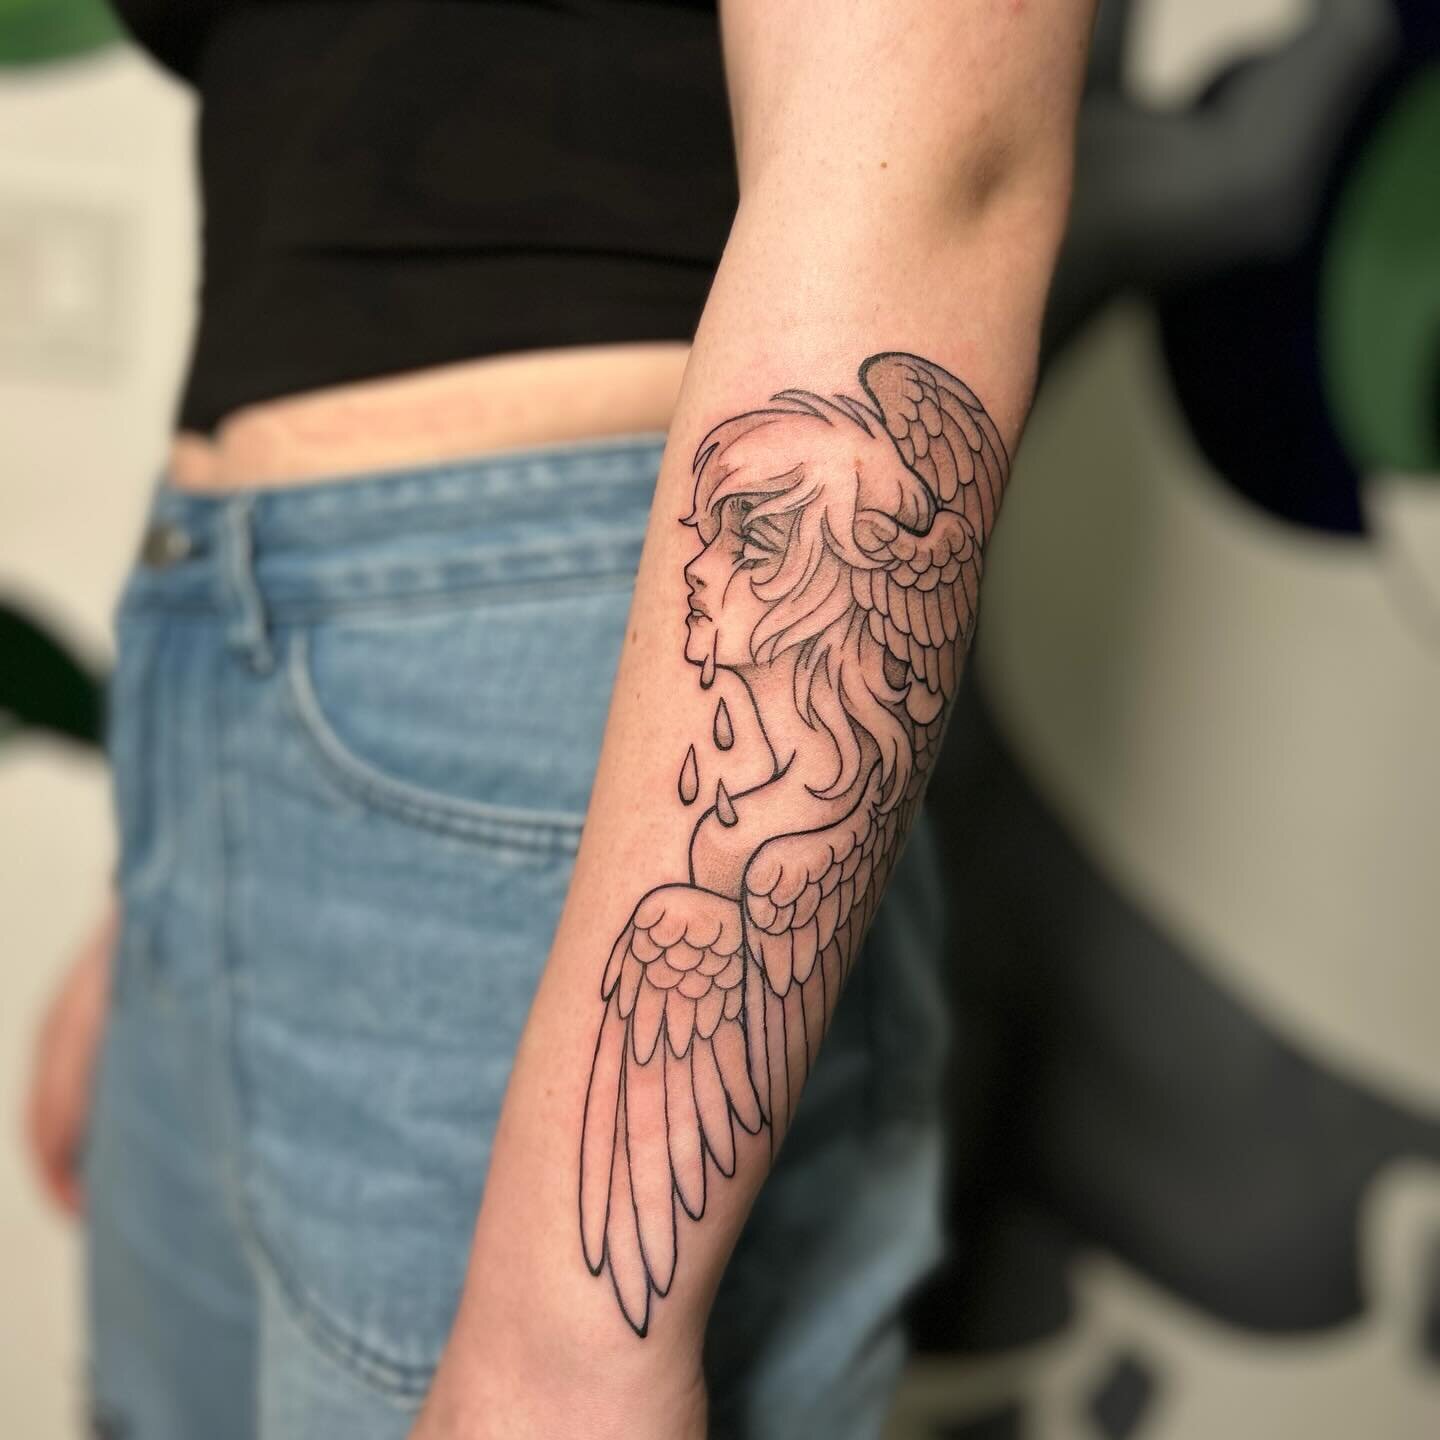 Angelic figure based off of Lucifer from Devilman Crybaby 👼🏼

Fell in love with this piece, big thanks to my client for travelling out to see me ❤️❤️❤️